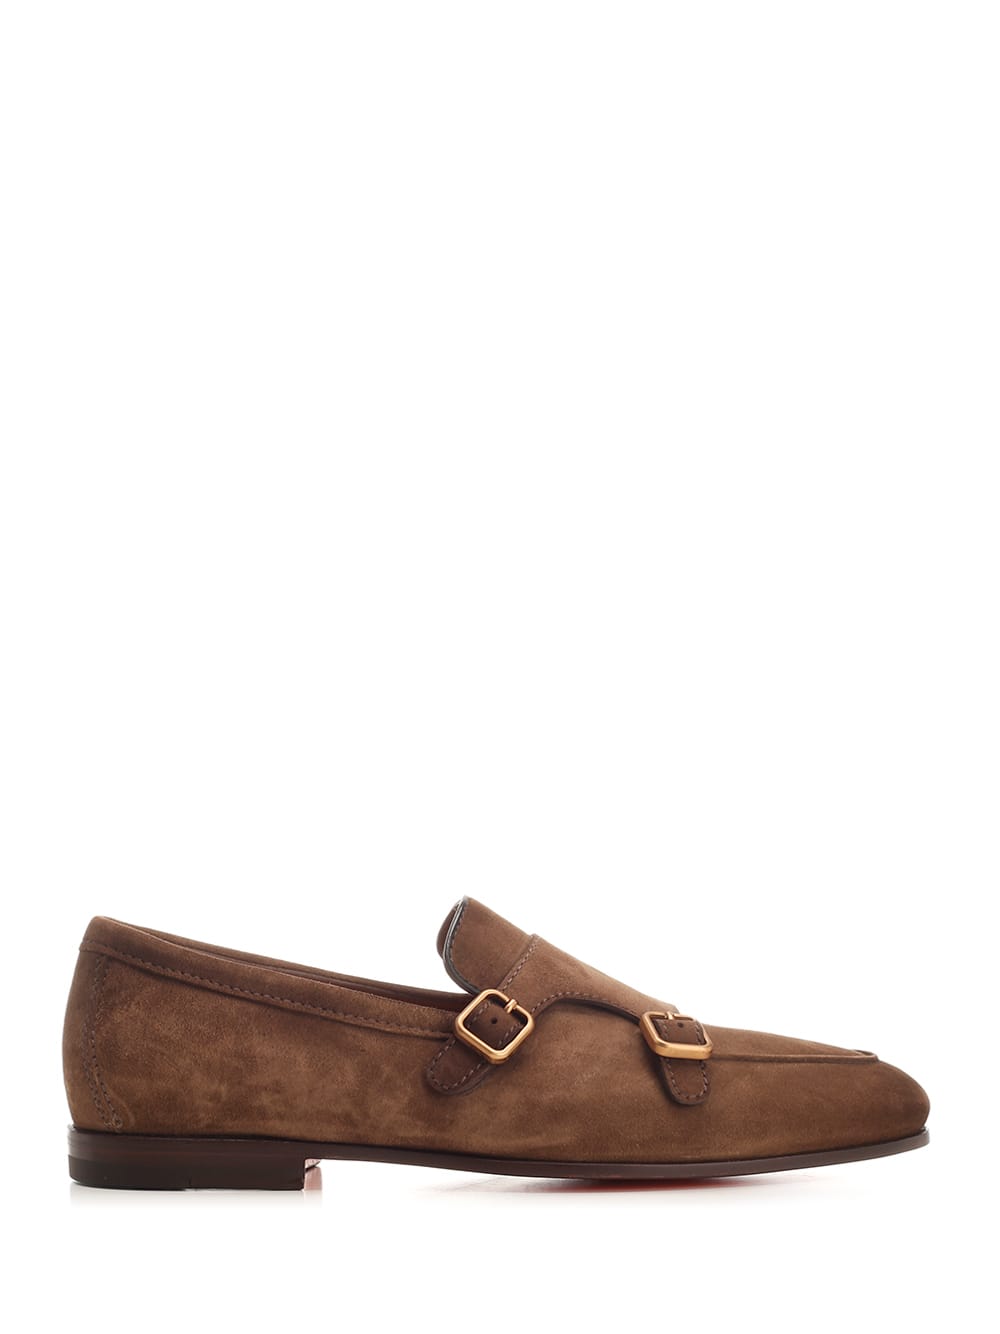 carlos Double Buckle Loafers